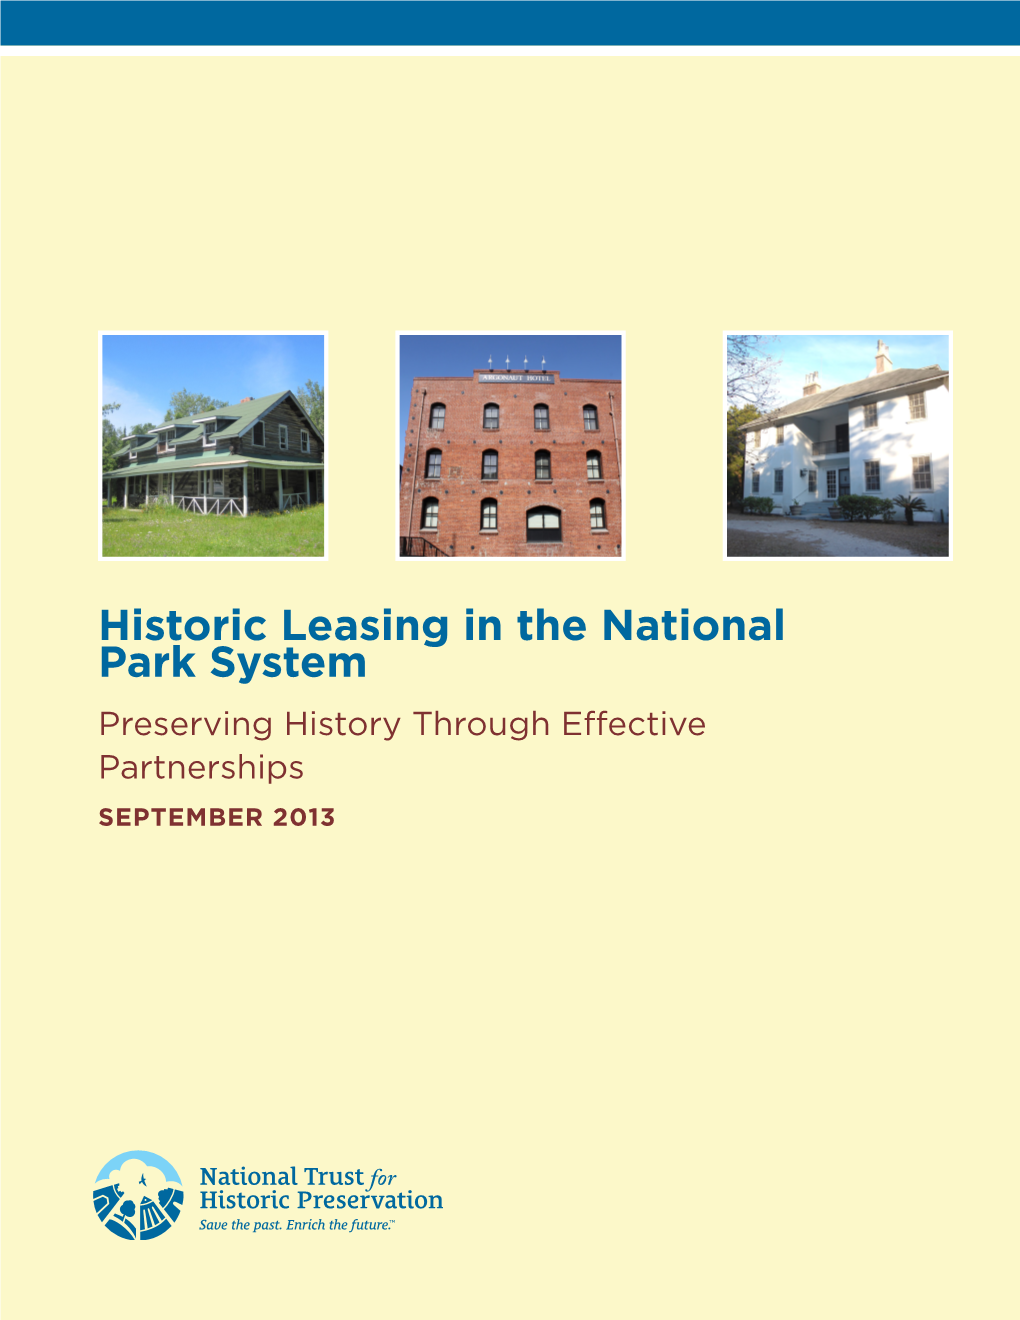 Historic Leasing in the National Park System